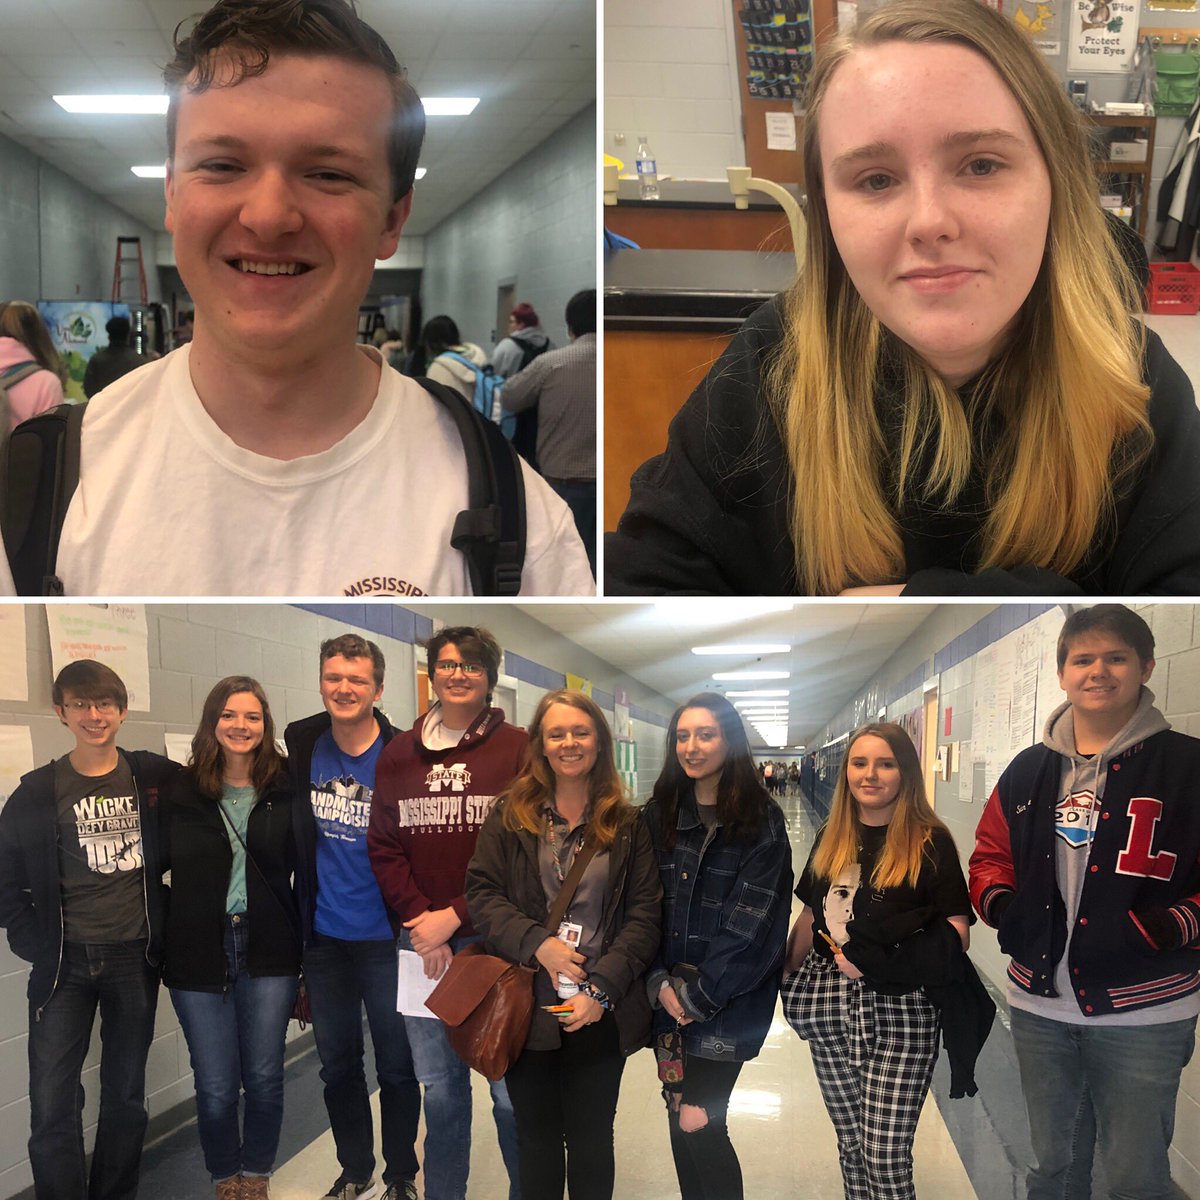 Lewisburg students competed in the regional #ChemistryOlympiad at Ole Miss.  Caleb Owens placed 2nd overall and Makenzie Symonds (6th overall) will compete for a chance to represent #mississippi in the national competition.  @TweetDCS_Comm #RaiseTheBar @TweetDCS @TweetDCS_LHS